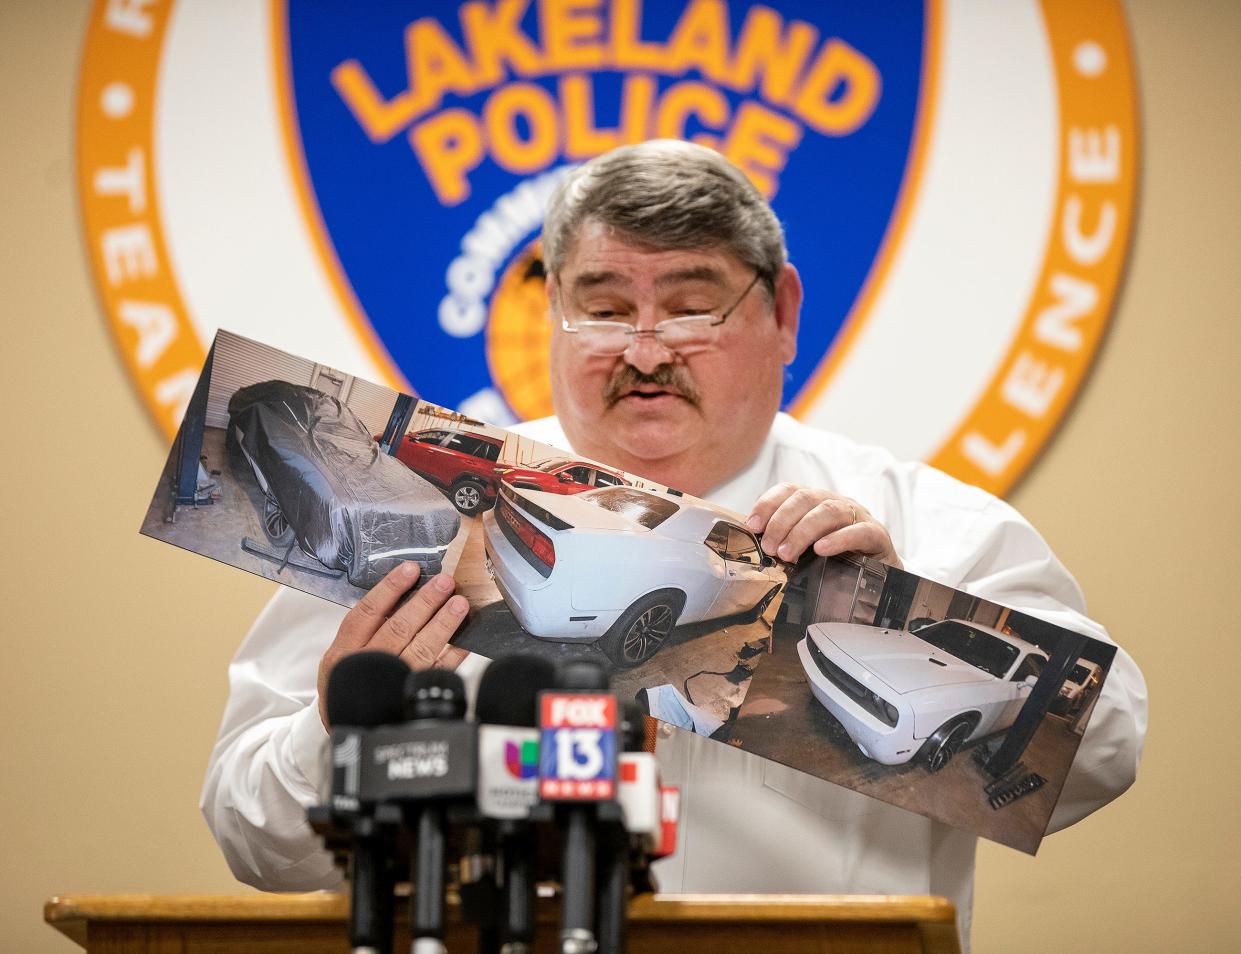 Lakeland Police Chief Sam Taylor holds a photo of a white 2014 Dodge Challenger involved in a shooting that killed two people, including a 3-year-old boy, in March.